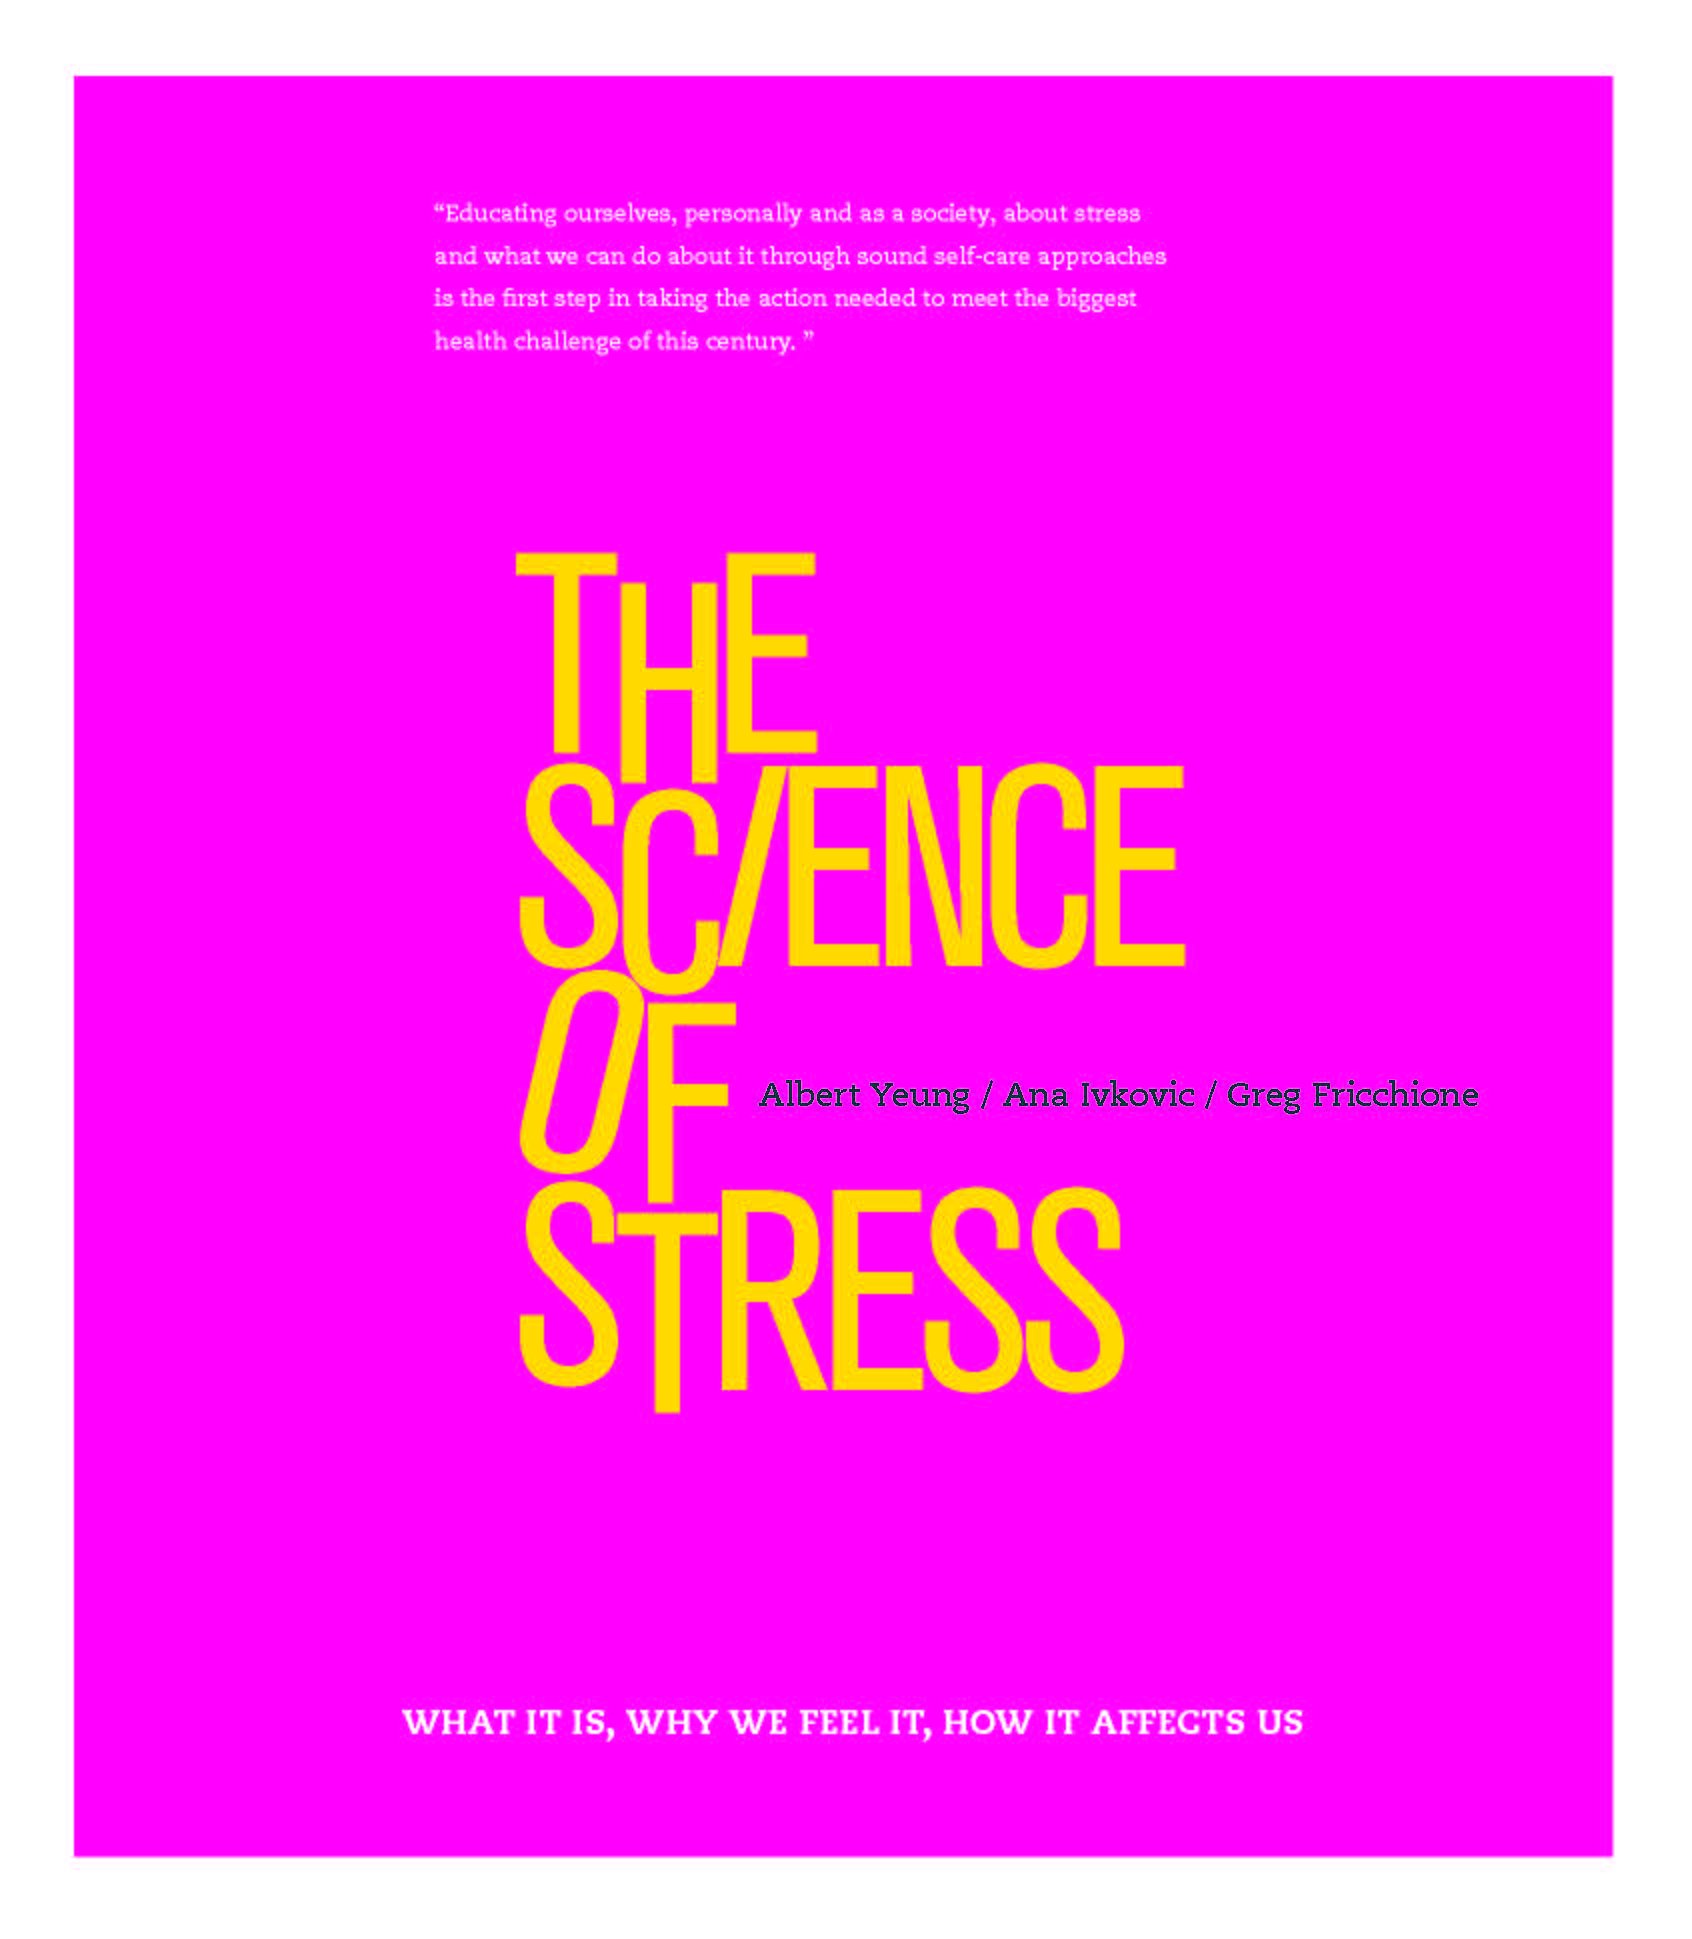 The Science of Stress